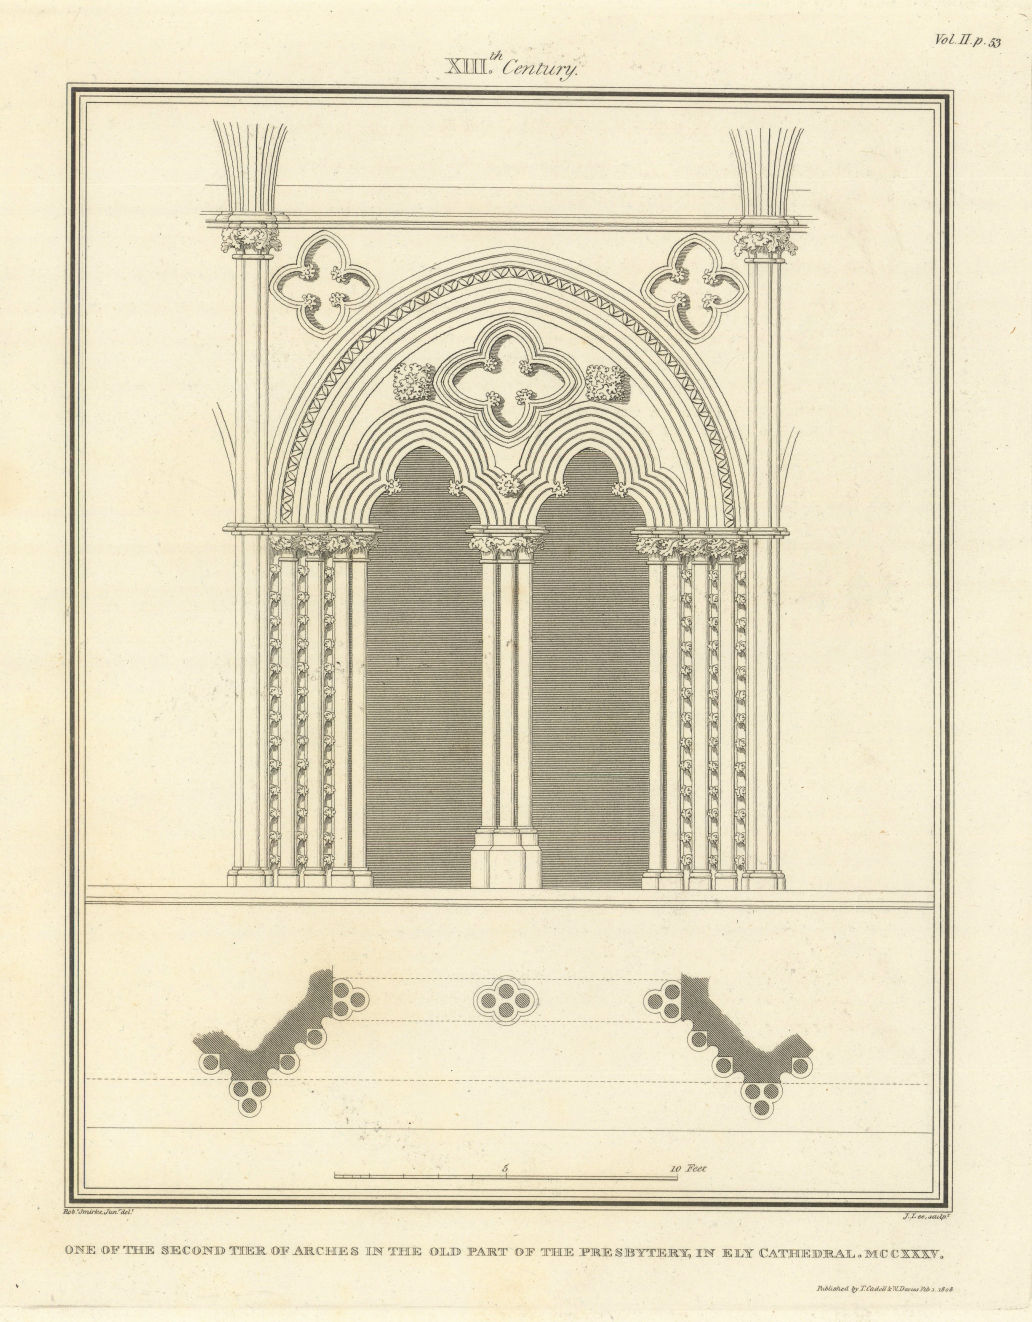 Associate Product One of the second tier of arches in the Presbytery in Ely Cathedral. SMIRKE 1810